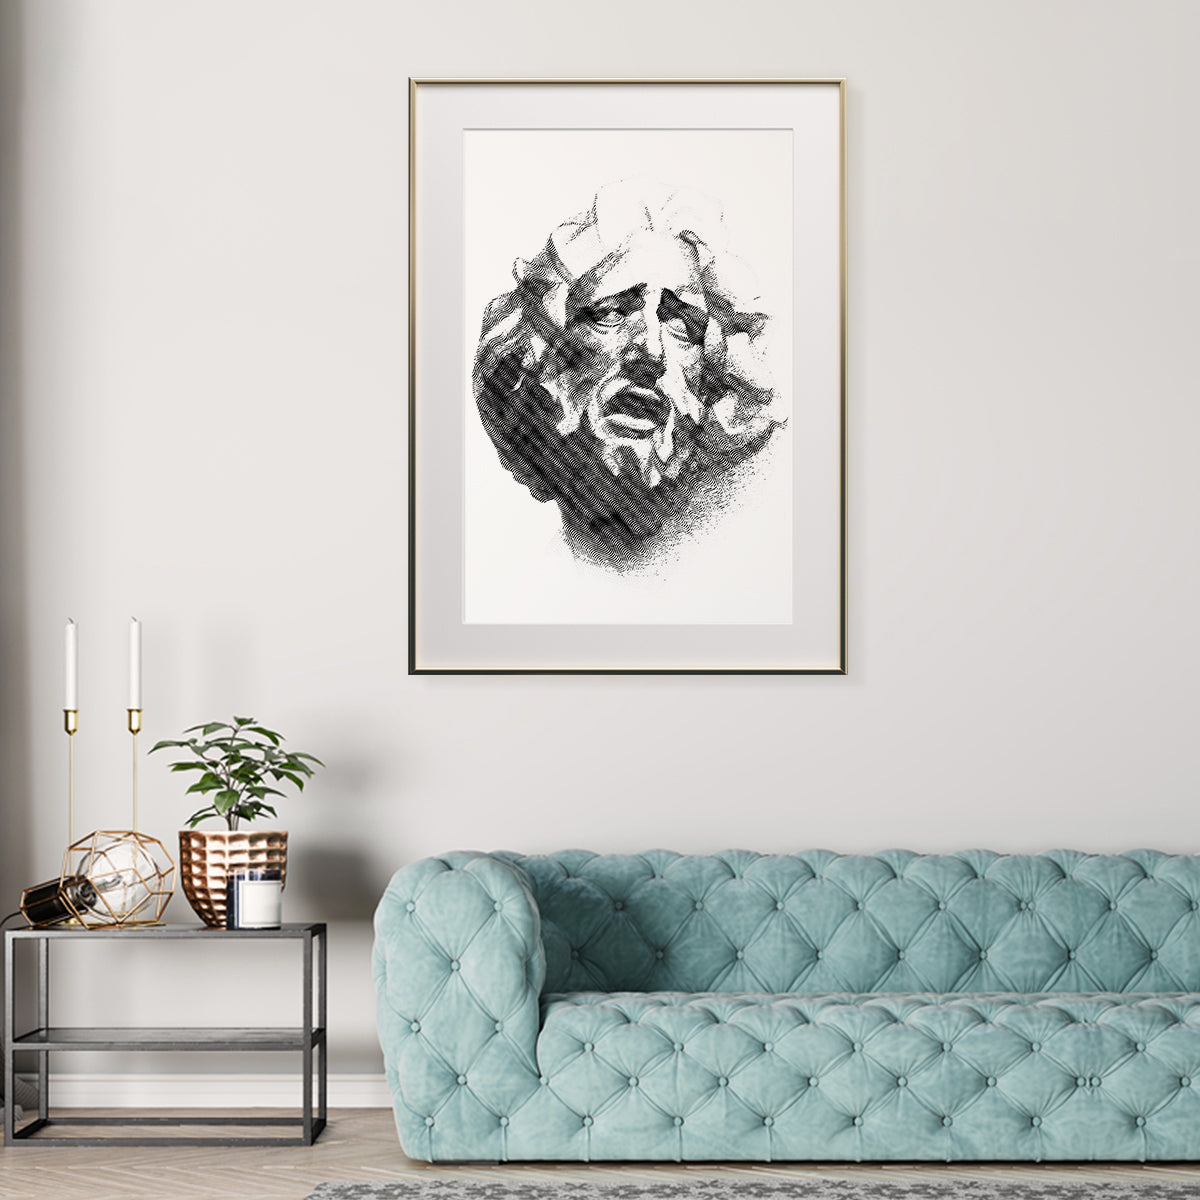 Ancient Greek Minimalist Portrait Black And White Posters For Home Decor-Vertical Posters NOT FRAMED-CetArt-8″x10″ inches-CetArt